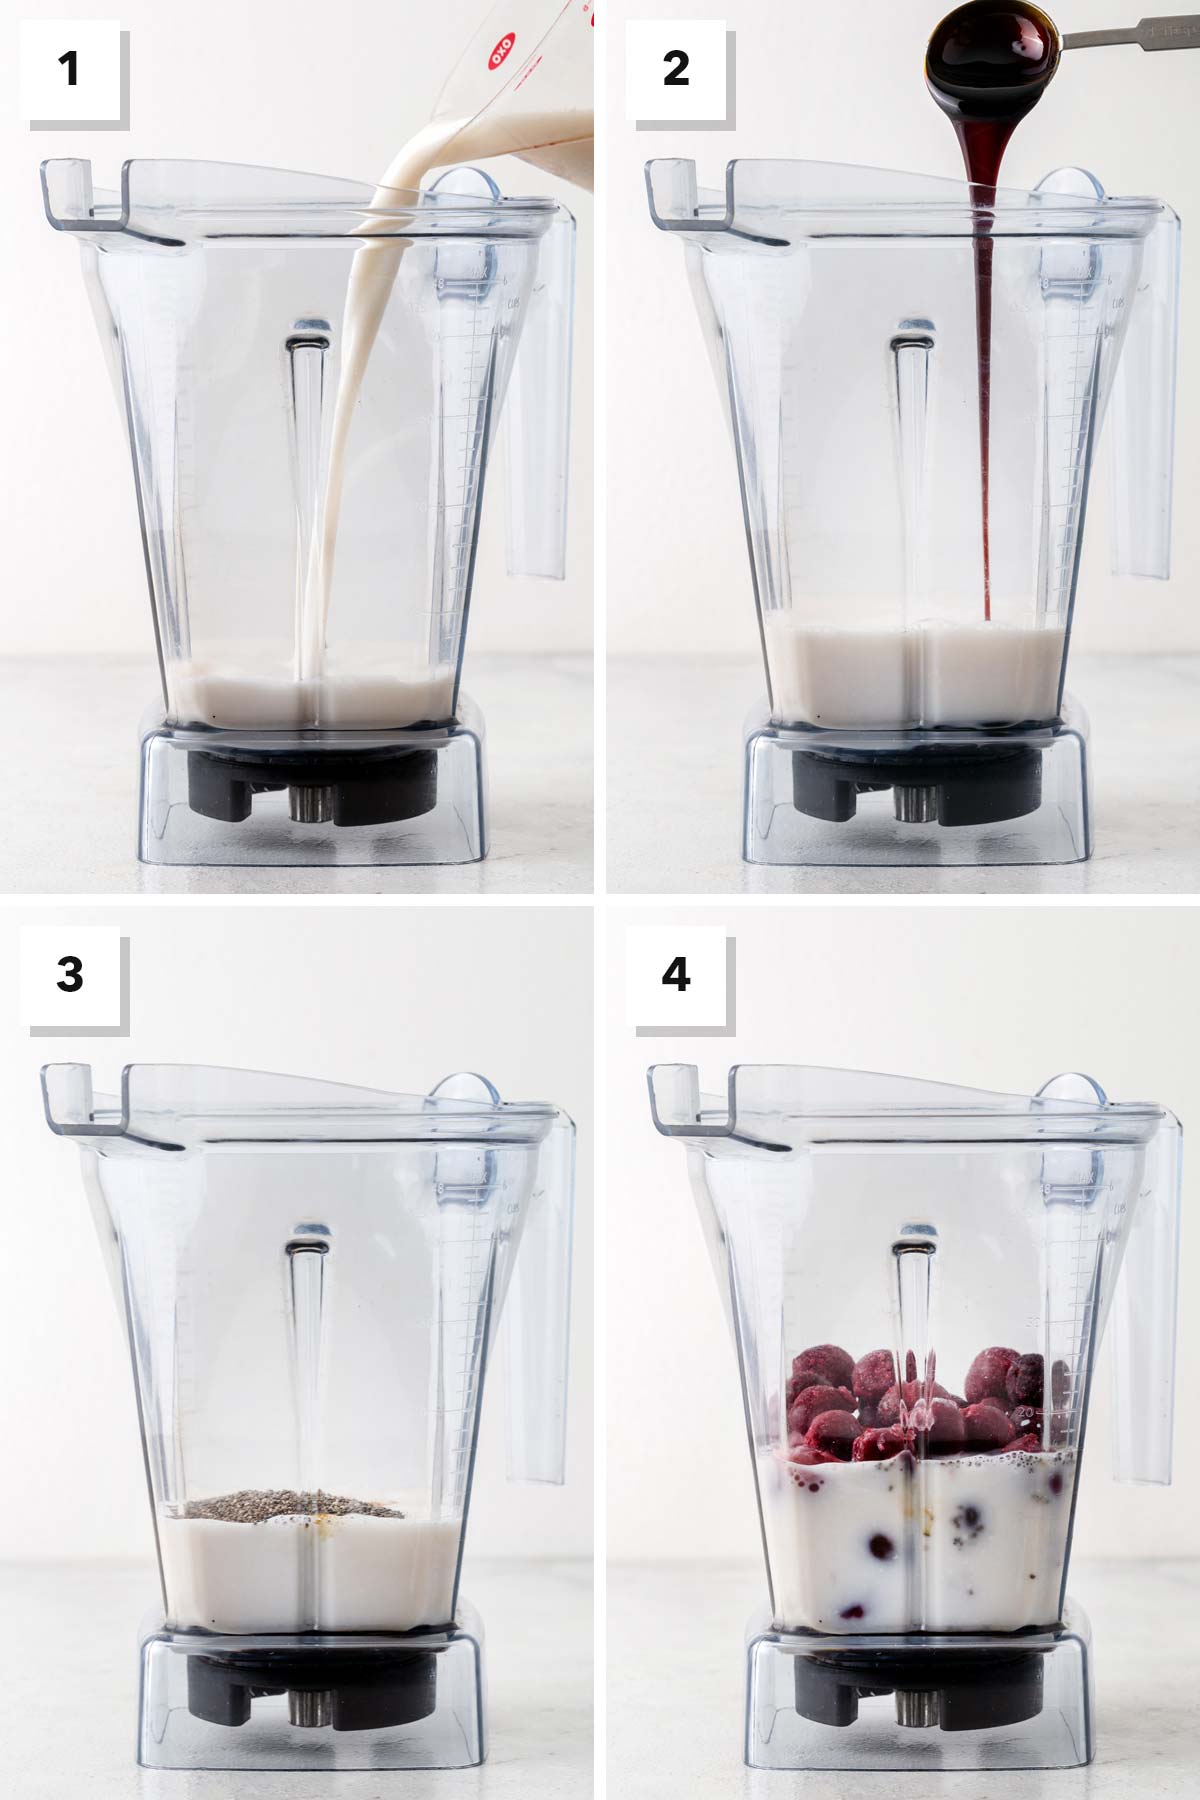 Steps for making a cherry smoothie.